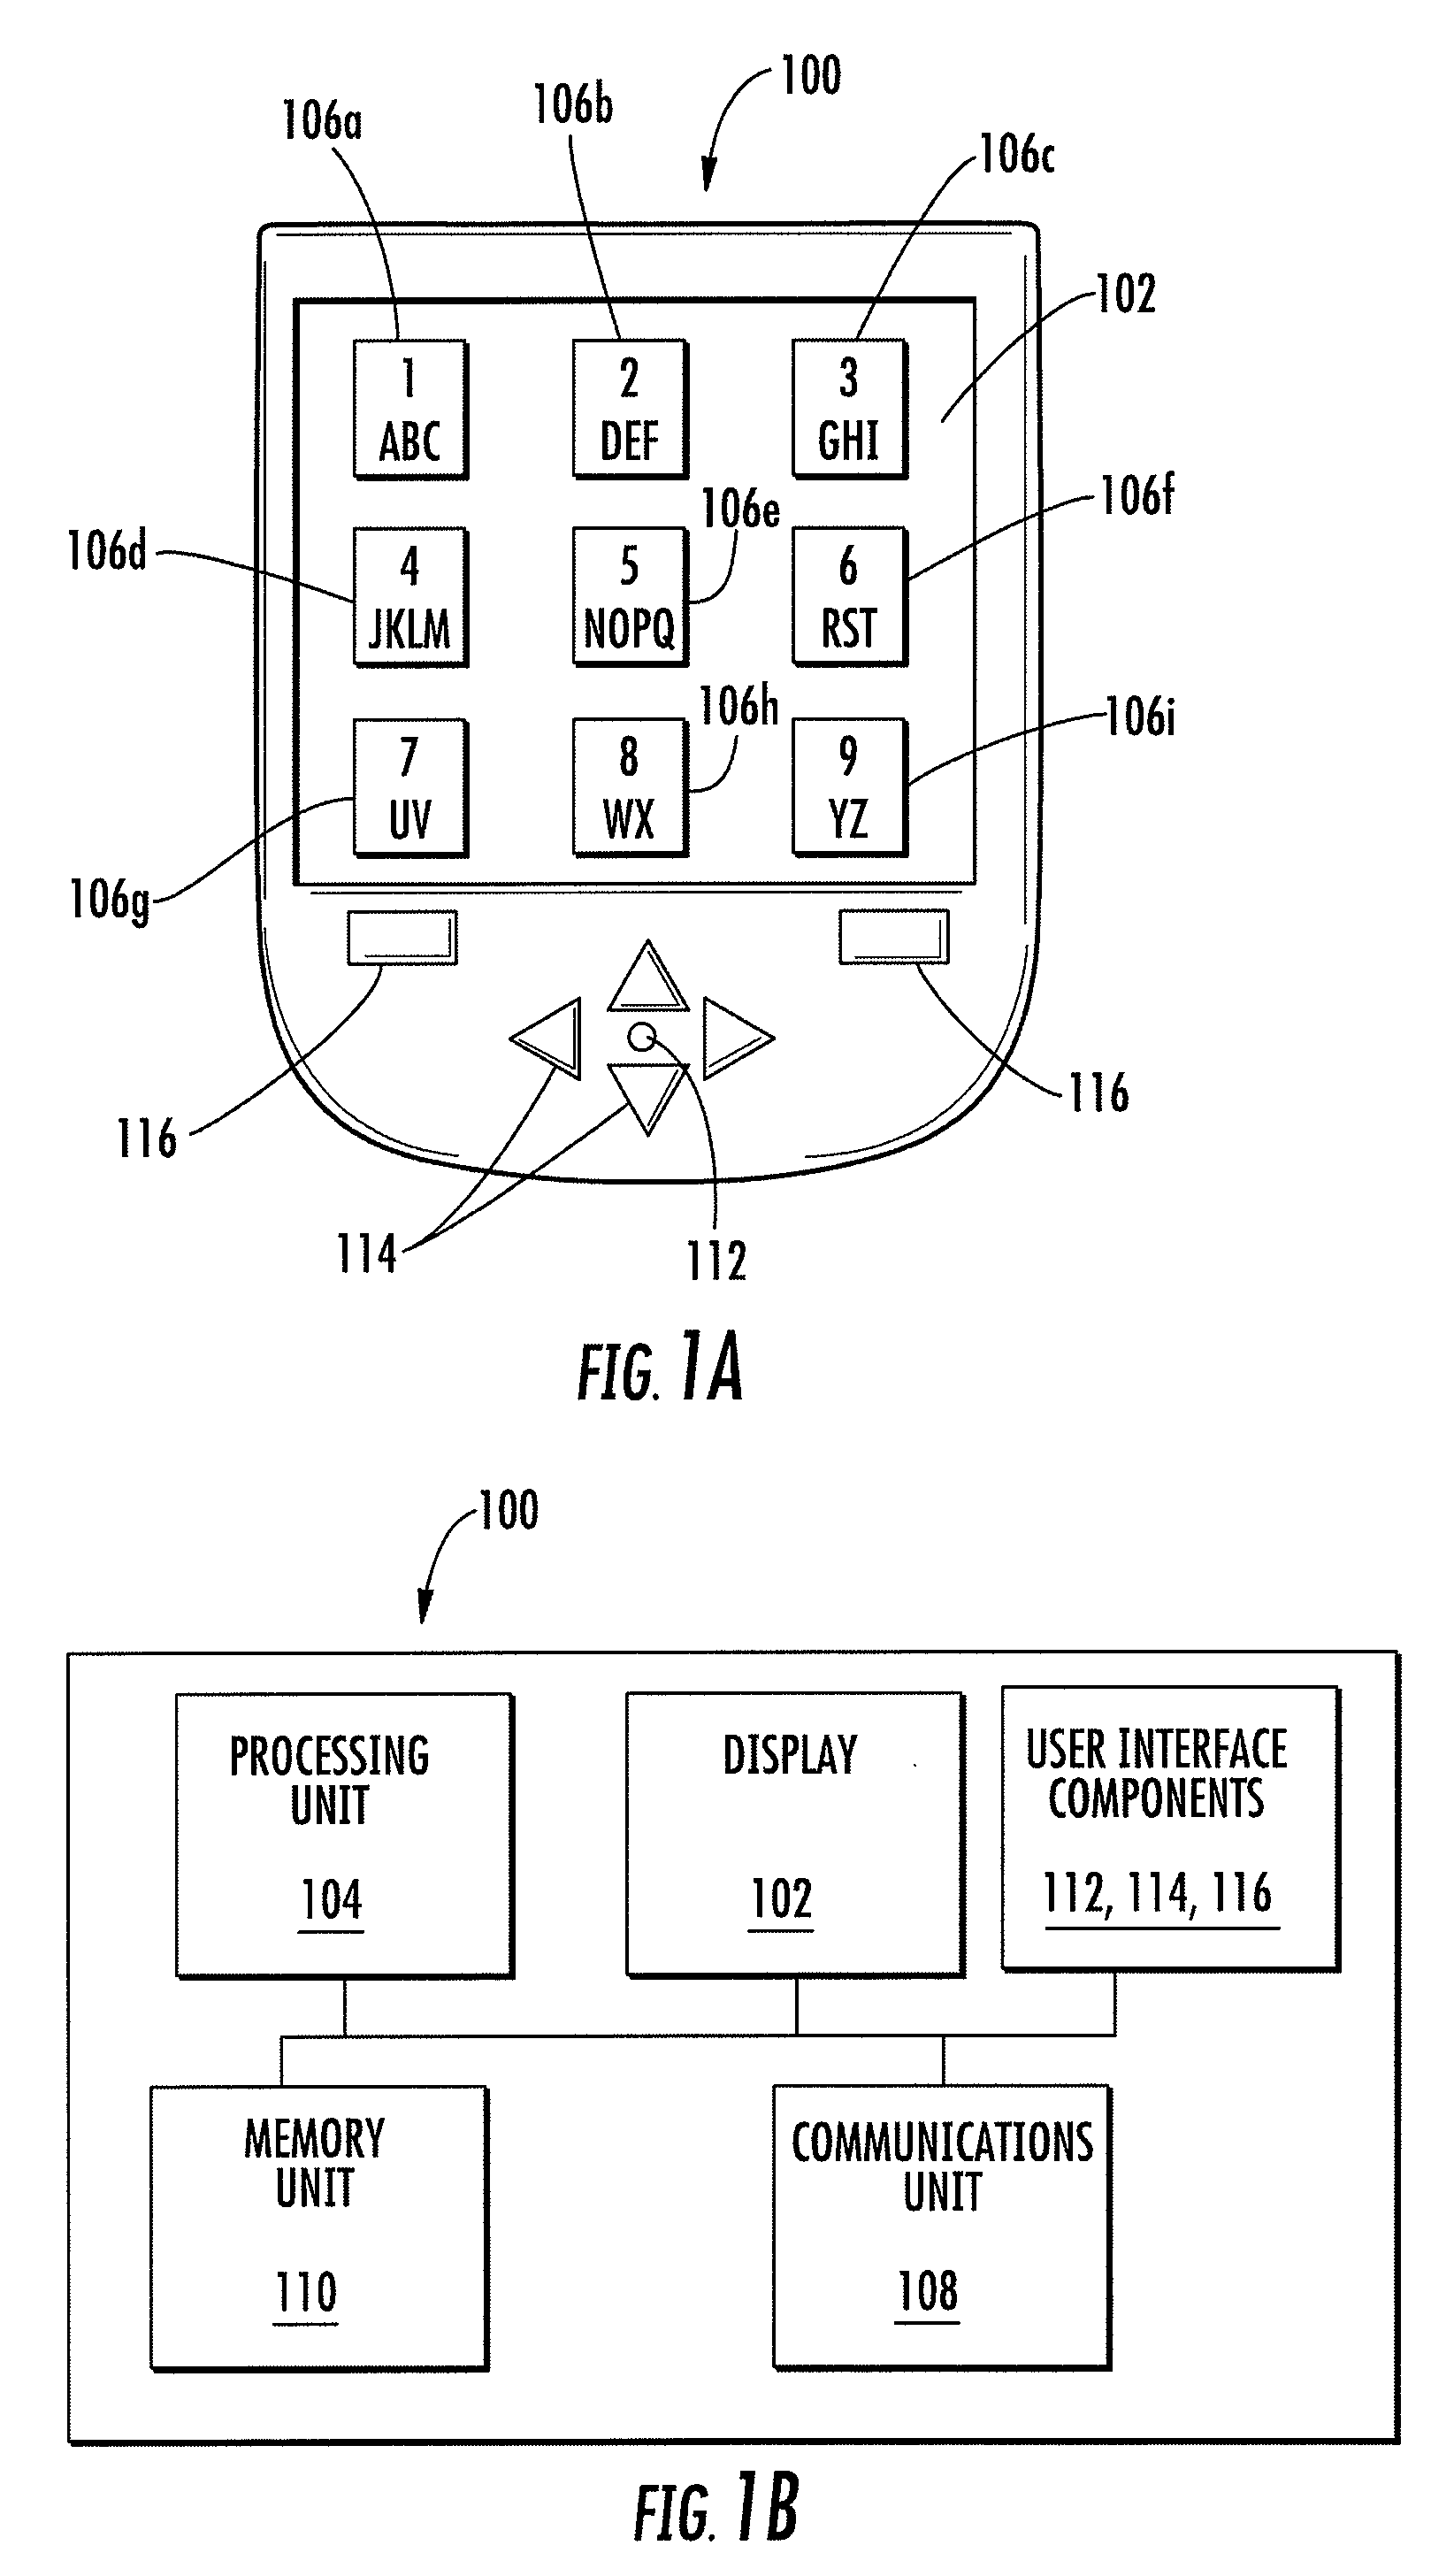 Apparatus, method, and computer program product for affecting an arrangement of selectable items